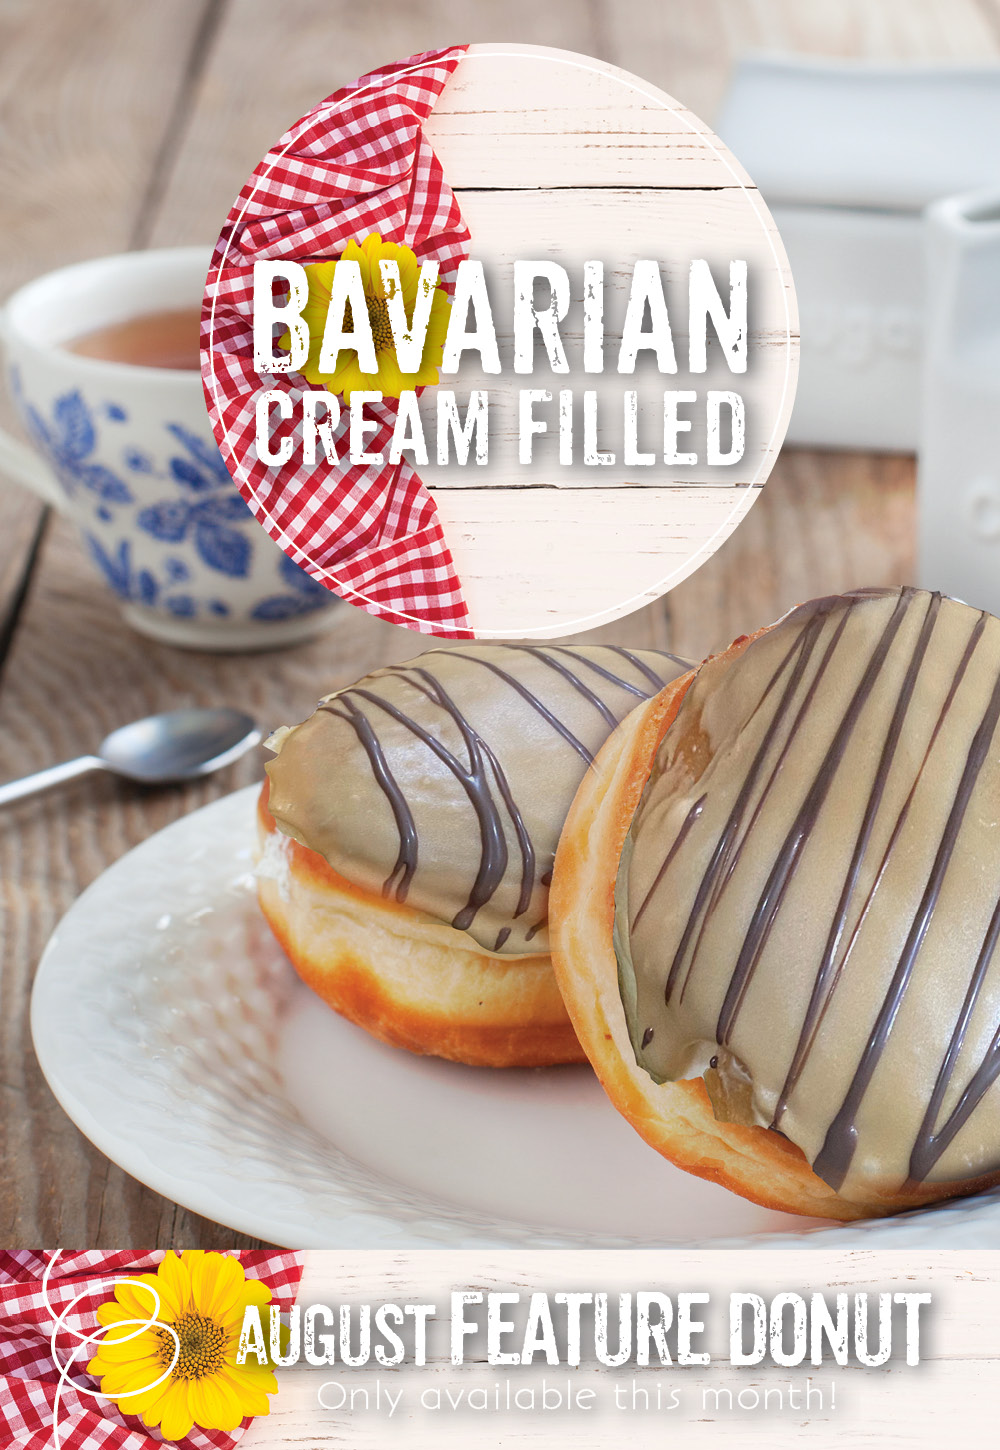 The Invermere Bakery - Bavarian Cream Filled Donut - August Special